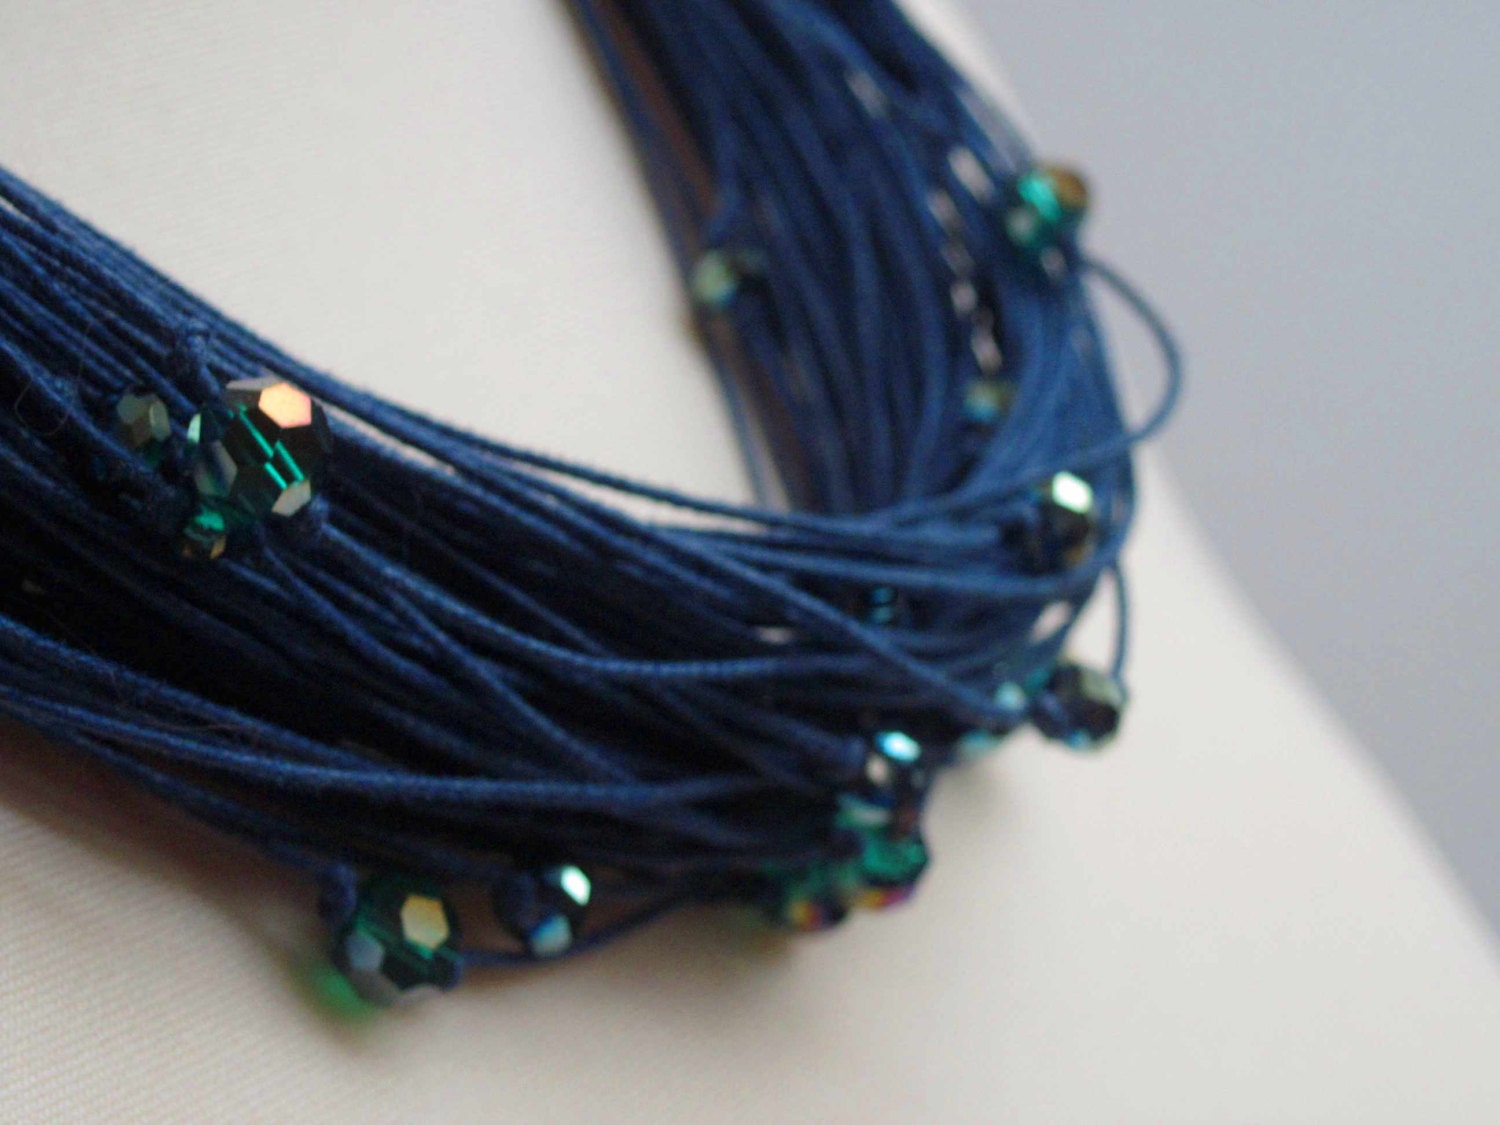 Multistrand Fiber Necklace Navy Blue Linen Sparkling Glass Eco Friendly Organic Jewelry Nautical Linen Monaco Gift for Her Cobalt - DreamsFactory